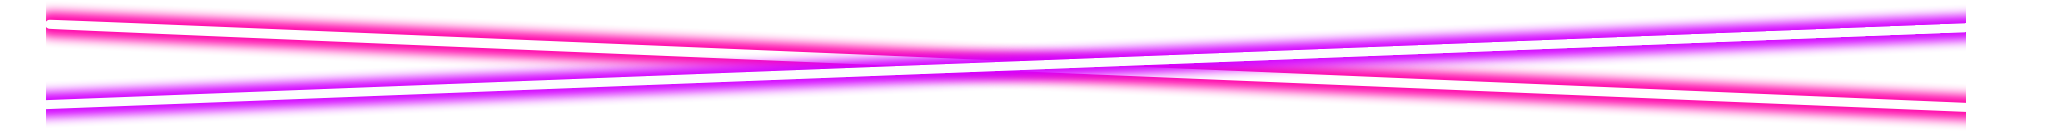 Pink Neon Divider Two